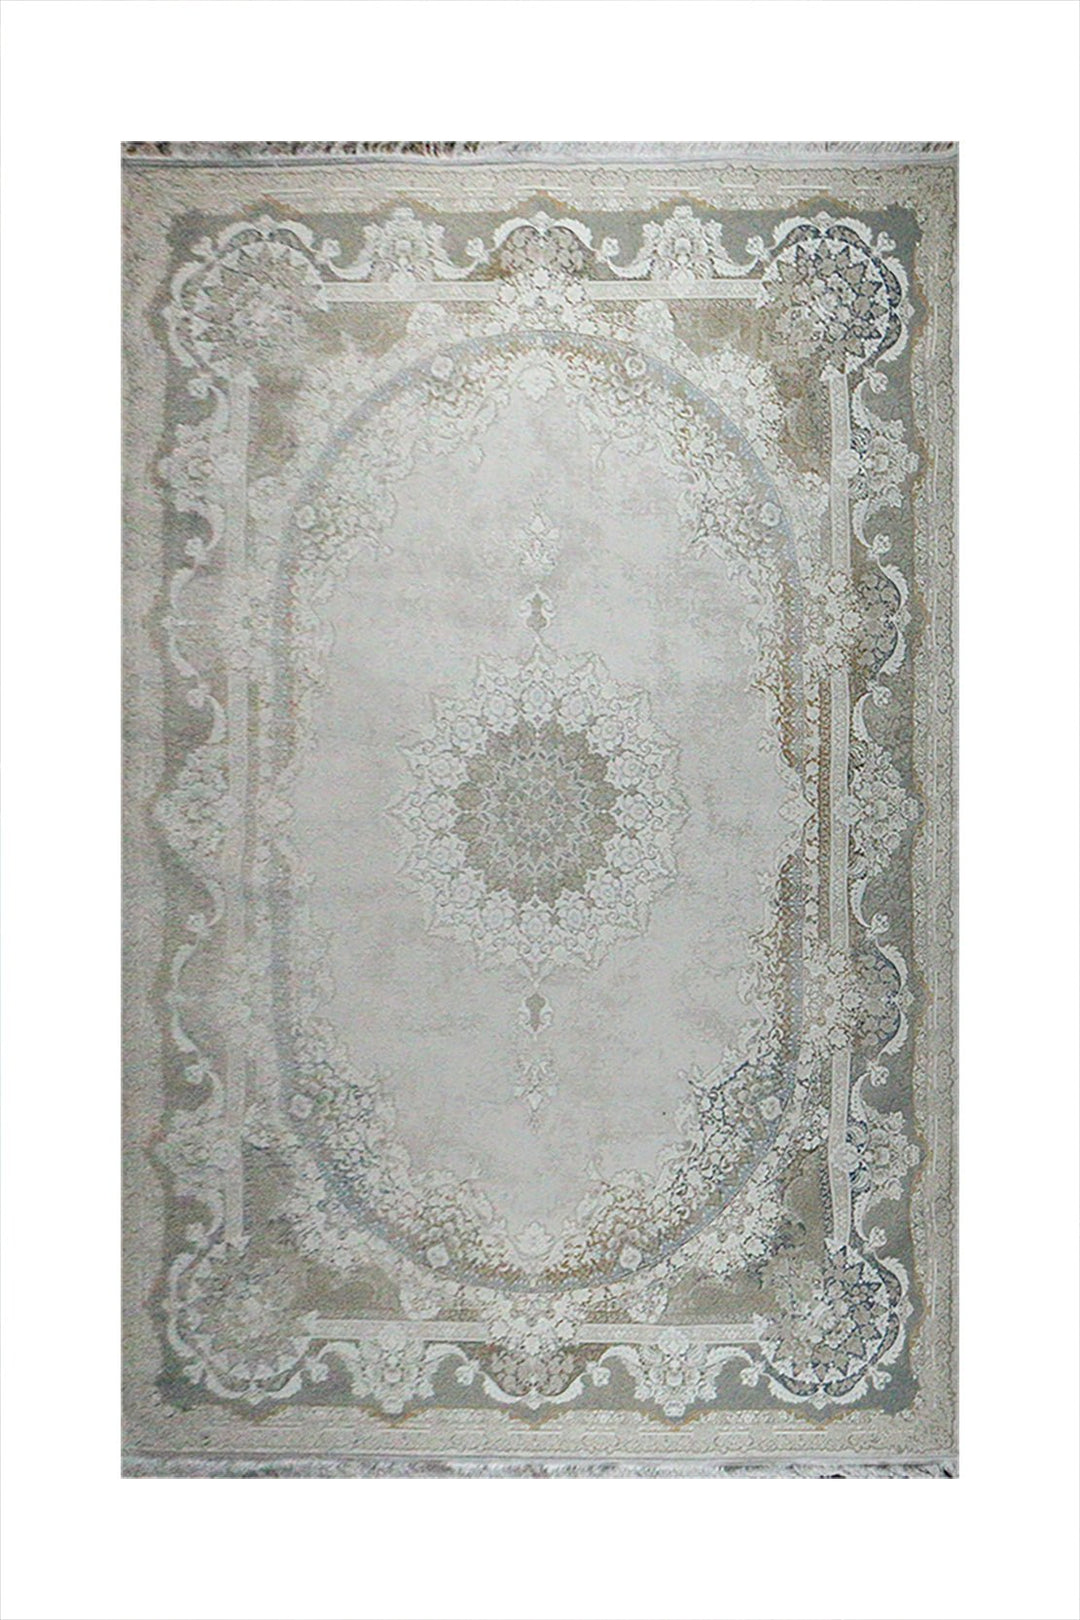 Iranian Premium Quality Oriental Collection Rug - 8.2 x 11. FT - Beige - Resilient Construction for Long-Lasting Use - V Surfaces